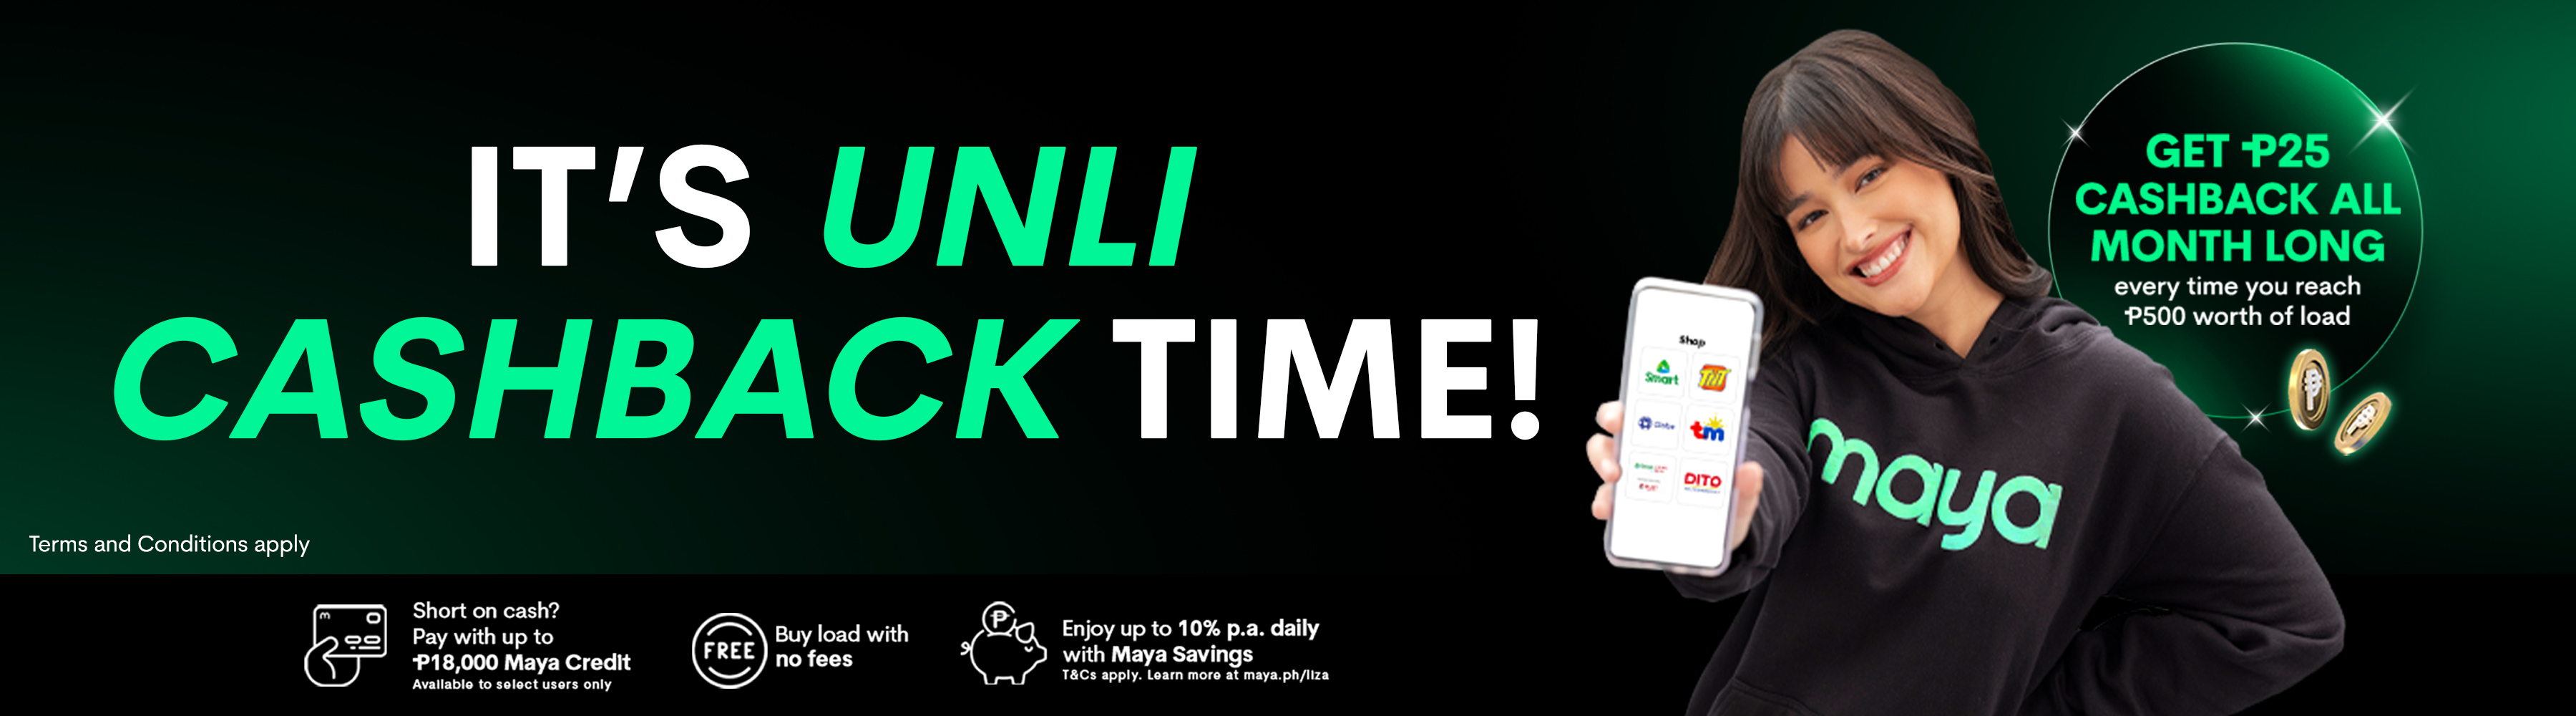 Unli Php25 cashback time!